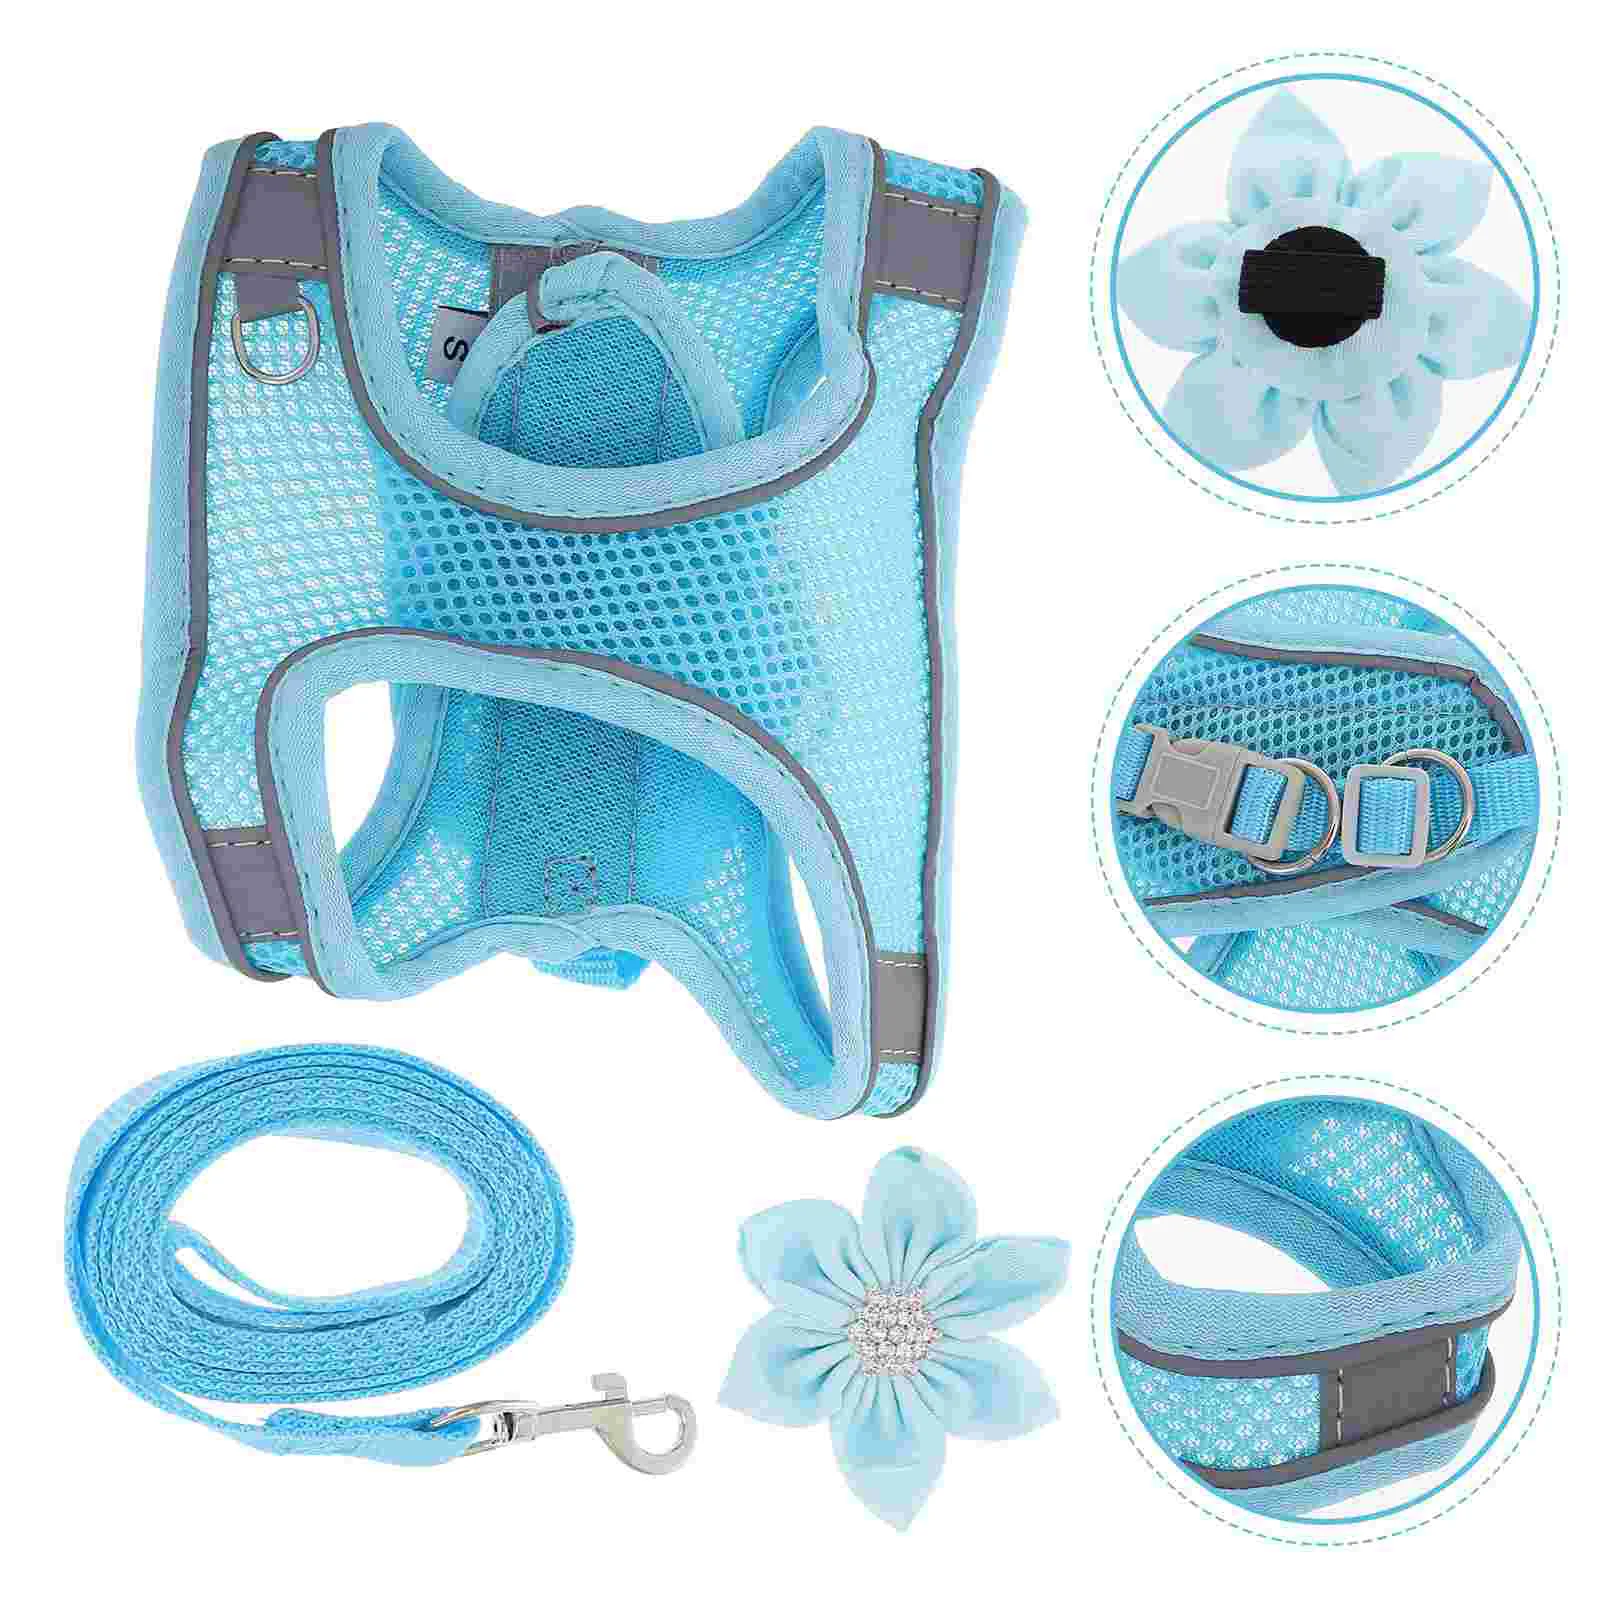 

Harness Dog Leash Cat Vest Pet Walking Puppy Collar Traction Safety Reflective Dogs Adjustable Collars Harnesses Leashes